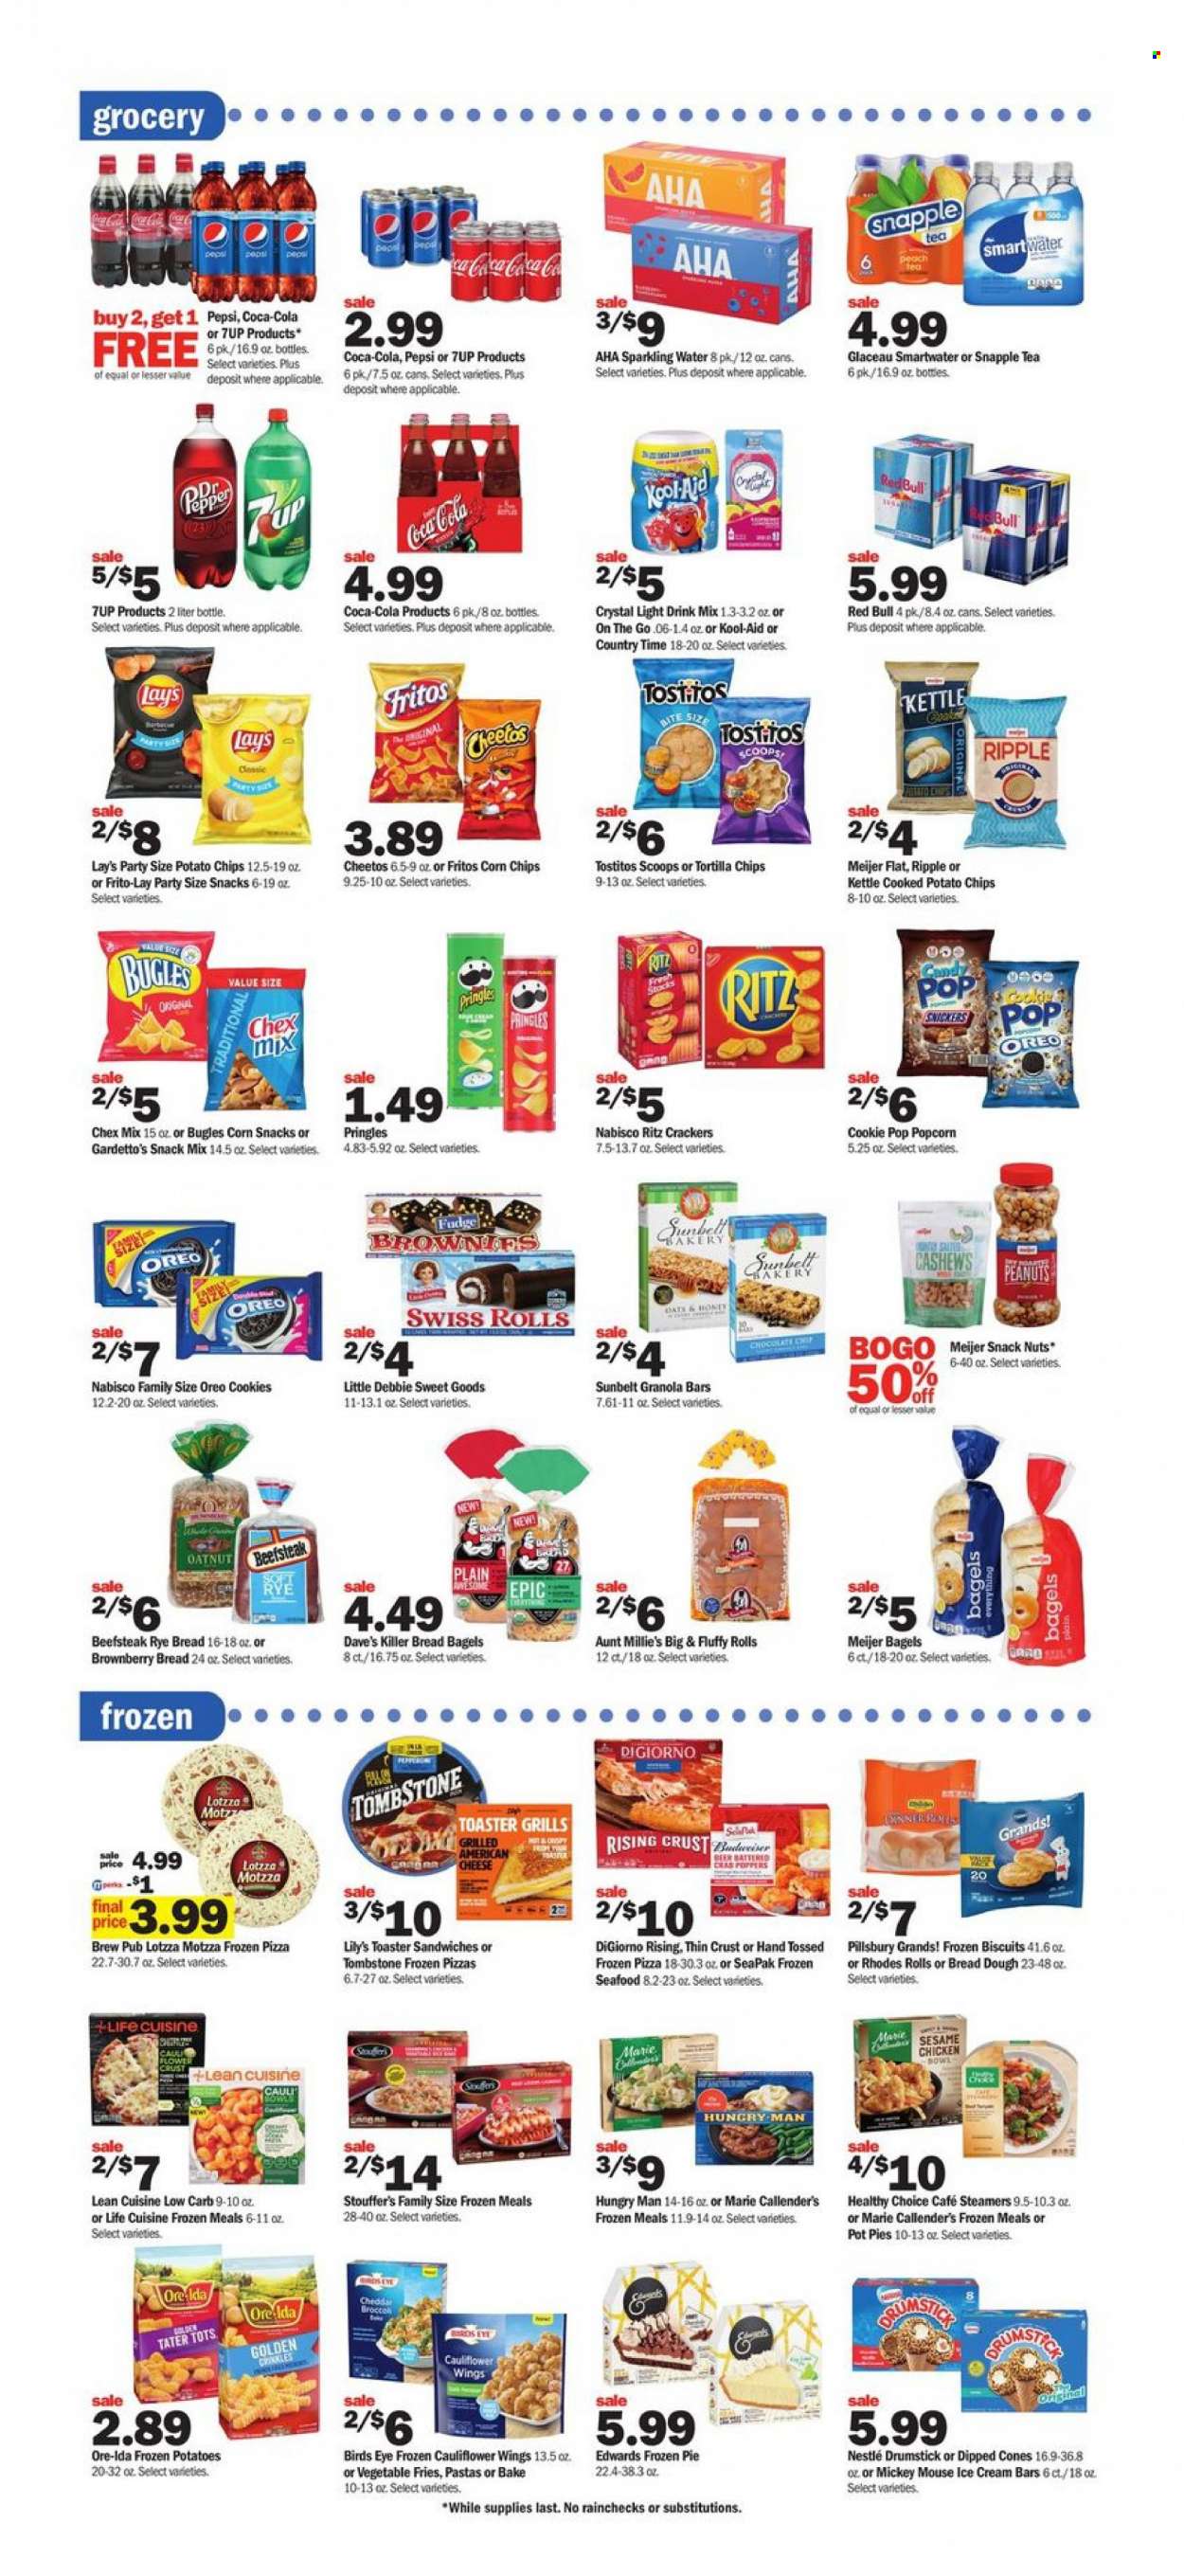 thumbnail - Meijer Flyer - 12/19/2021 - 12/24/2021 - Sales products - bagels, bread, pie, pot pie, seafood, pizza, sandwich, Pillsbury, Bird's Eye, Lean Cuisine, Healthy Choice, Marie Callender's, american cheese, Oreo, bread dough, ice cream, ice cream bars, Mickey Mouse, veggie fries, Stouffer's, Ore-Ida, tater tots, cookies, Nestlé, snack, crackers, biscuit, RITZ, Fritos, tortilla chips, potato chips, Pringles, Cheetos, Lay’s, corn chips, popcorn, Frito-Lay, Tostitos, Chex Mix, granola bar, cashews, peanuts, Coca-Cola, Pepsi, 7UP, Red Bull, Snapple, Country Time, sparkling water, Smartwater, tea, toaster. Page 7.